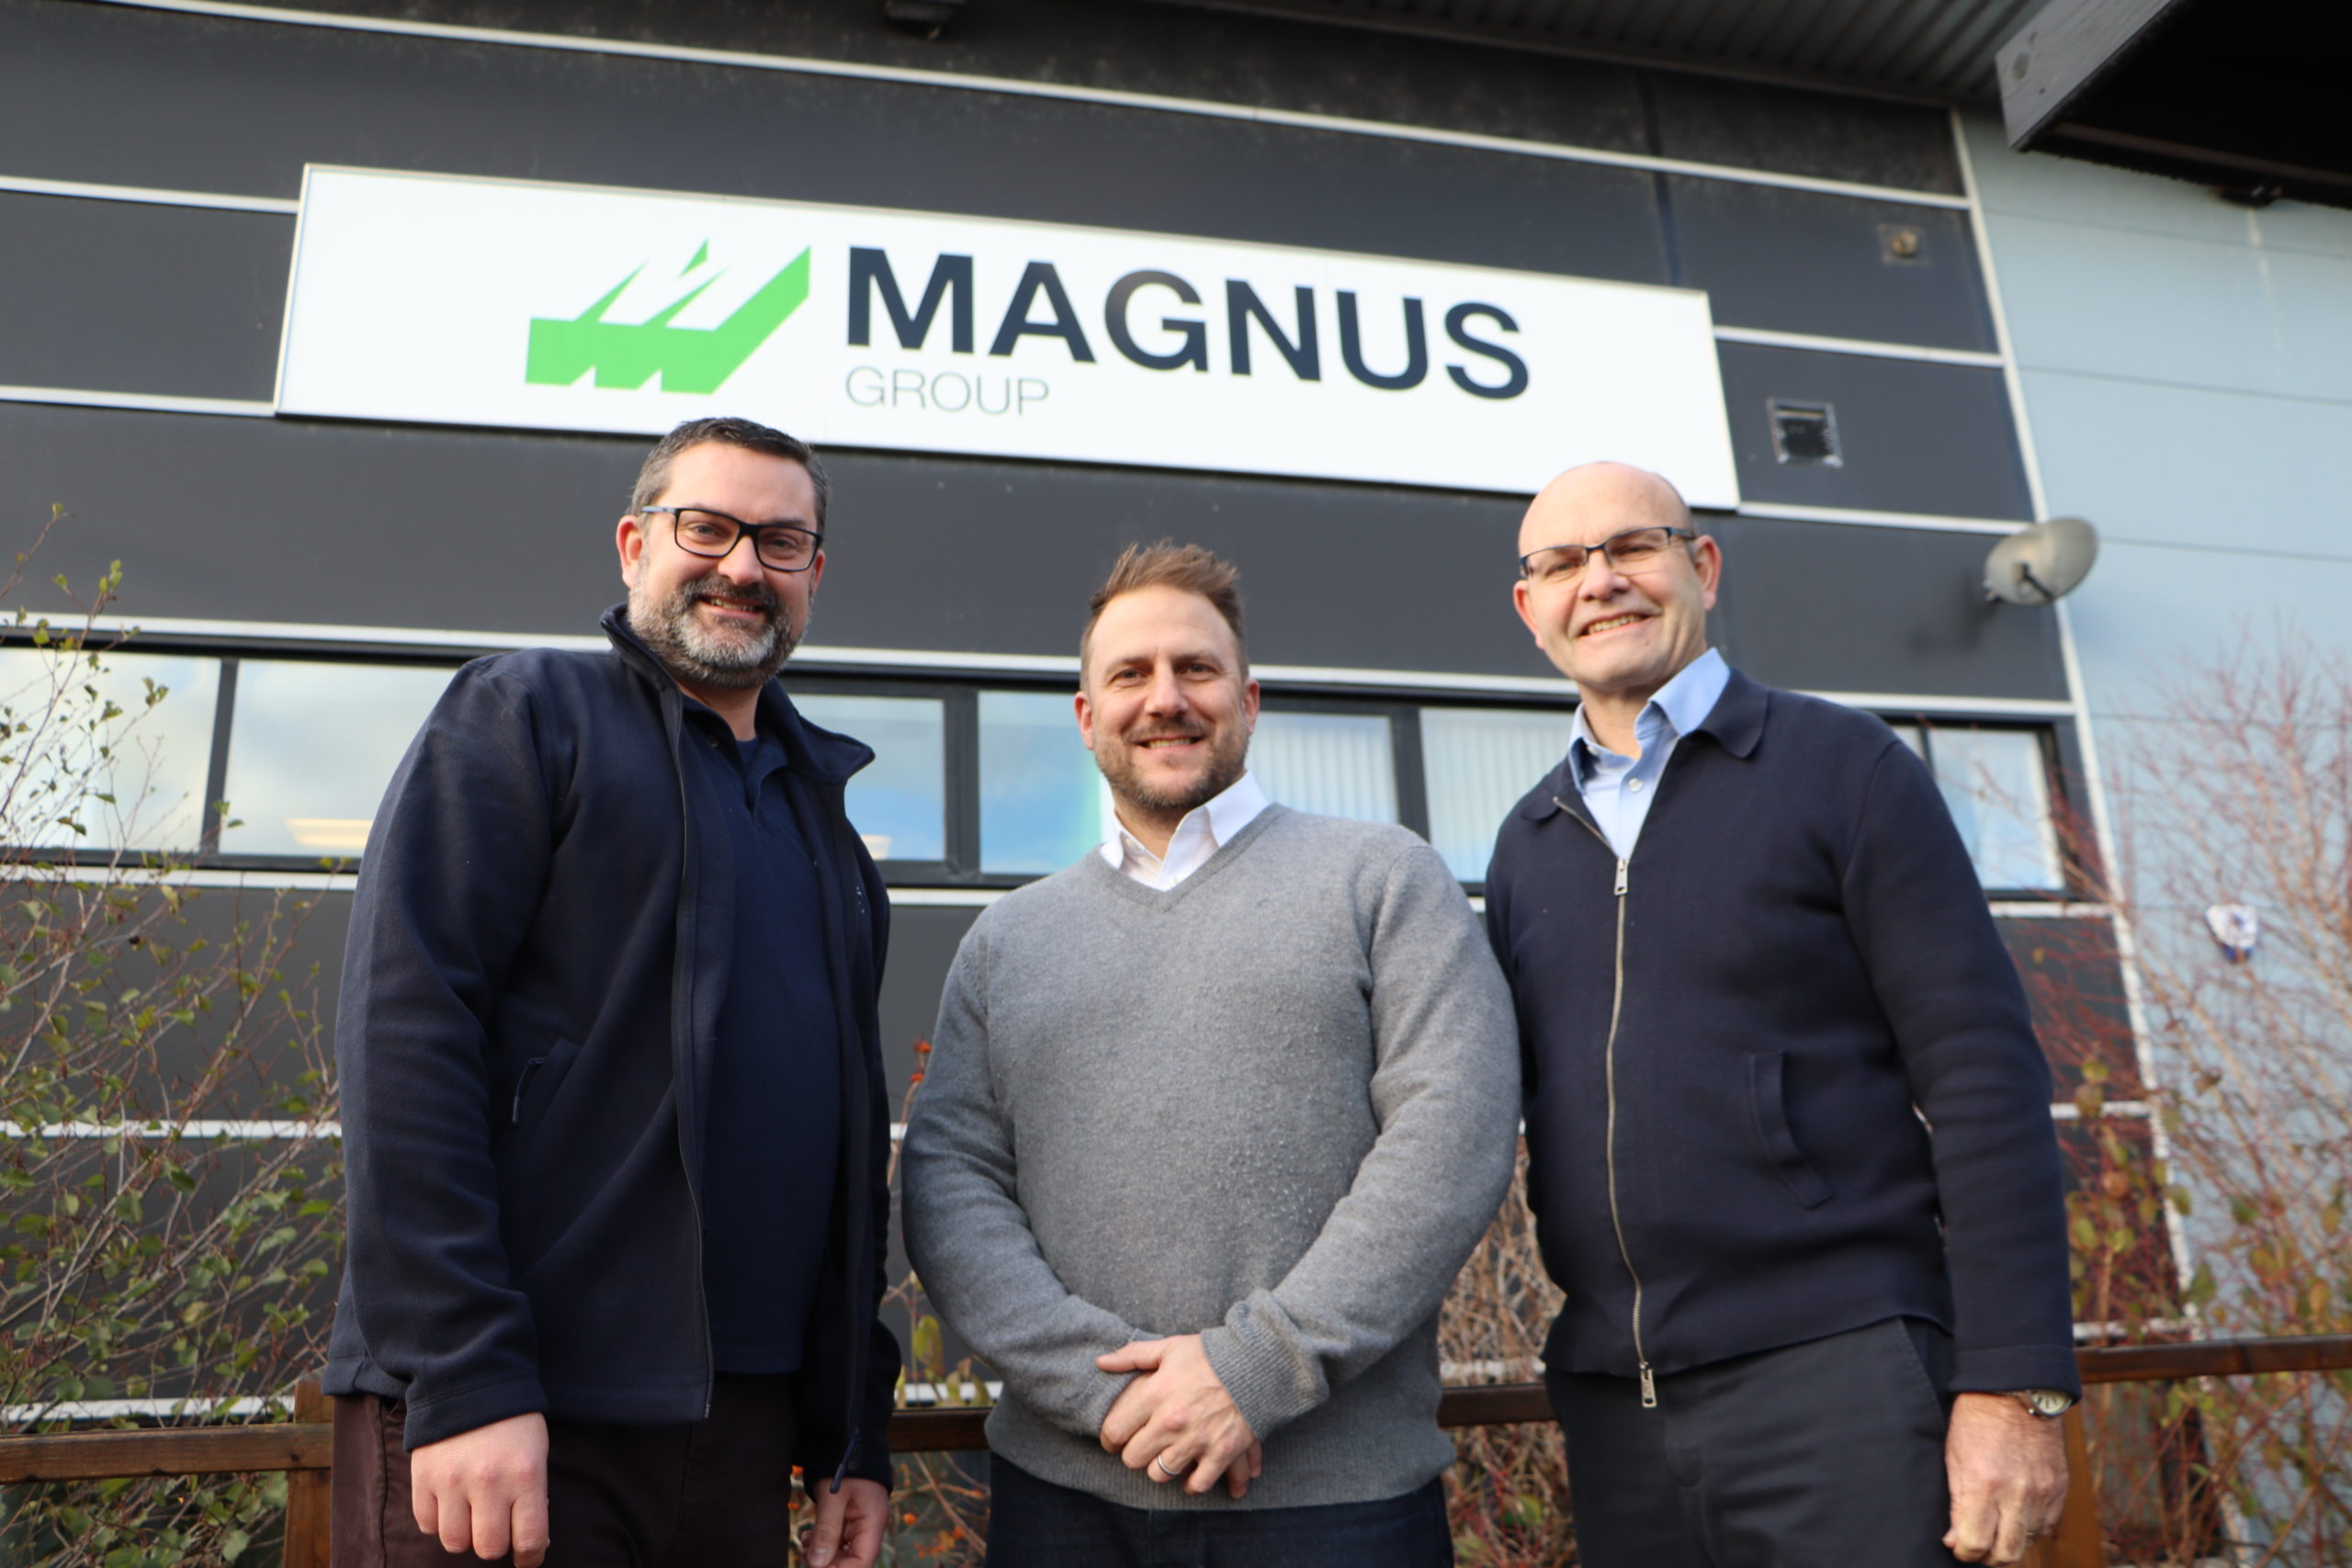 Jon Neal and Ian White of Suffolk Mind welcome new patron Olly Magnus outside Magnus group office